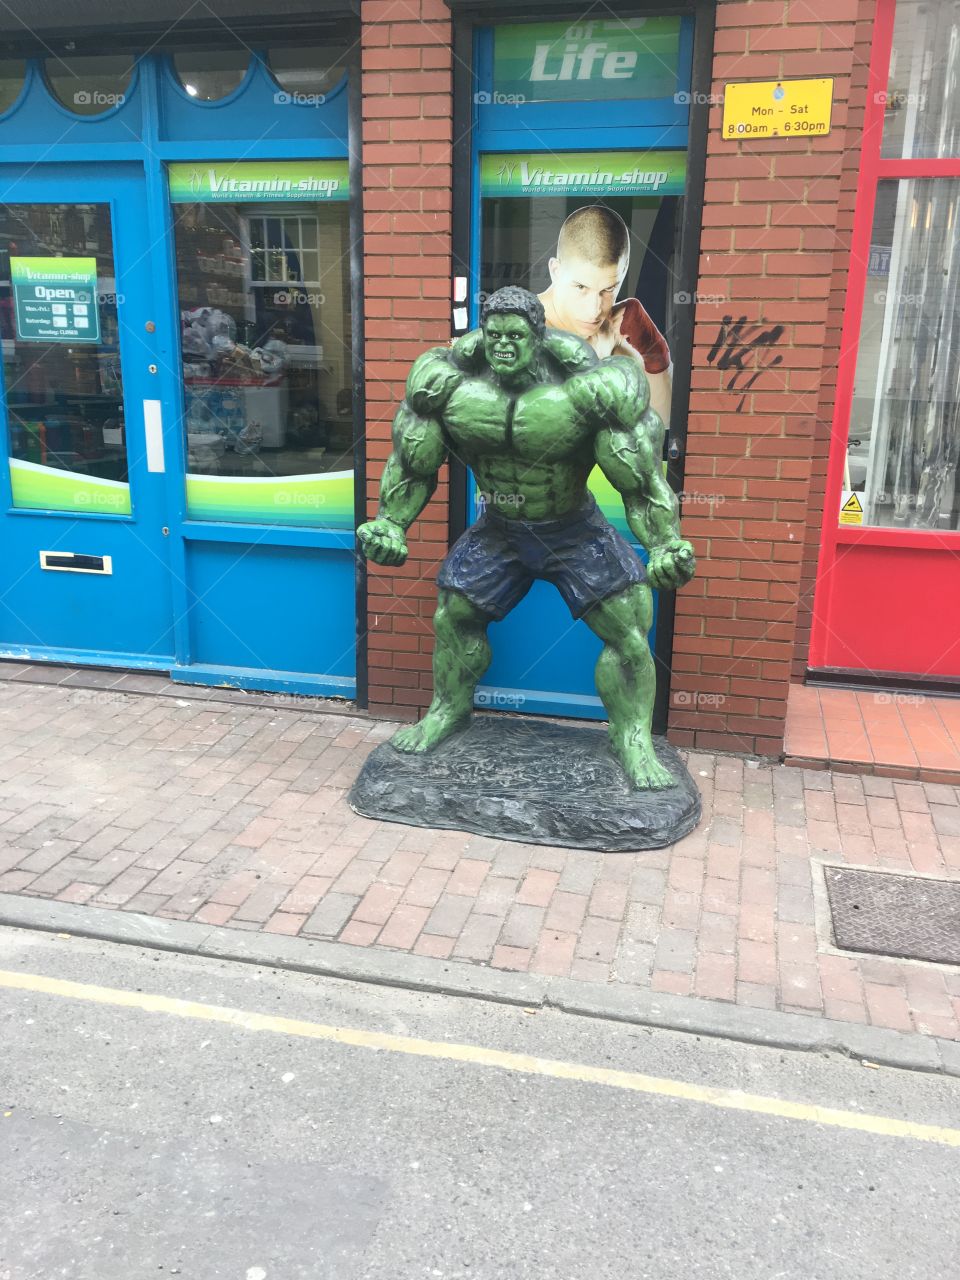 Incredible Hulk statue outside a shop in Gravesend town centre 